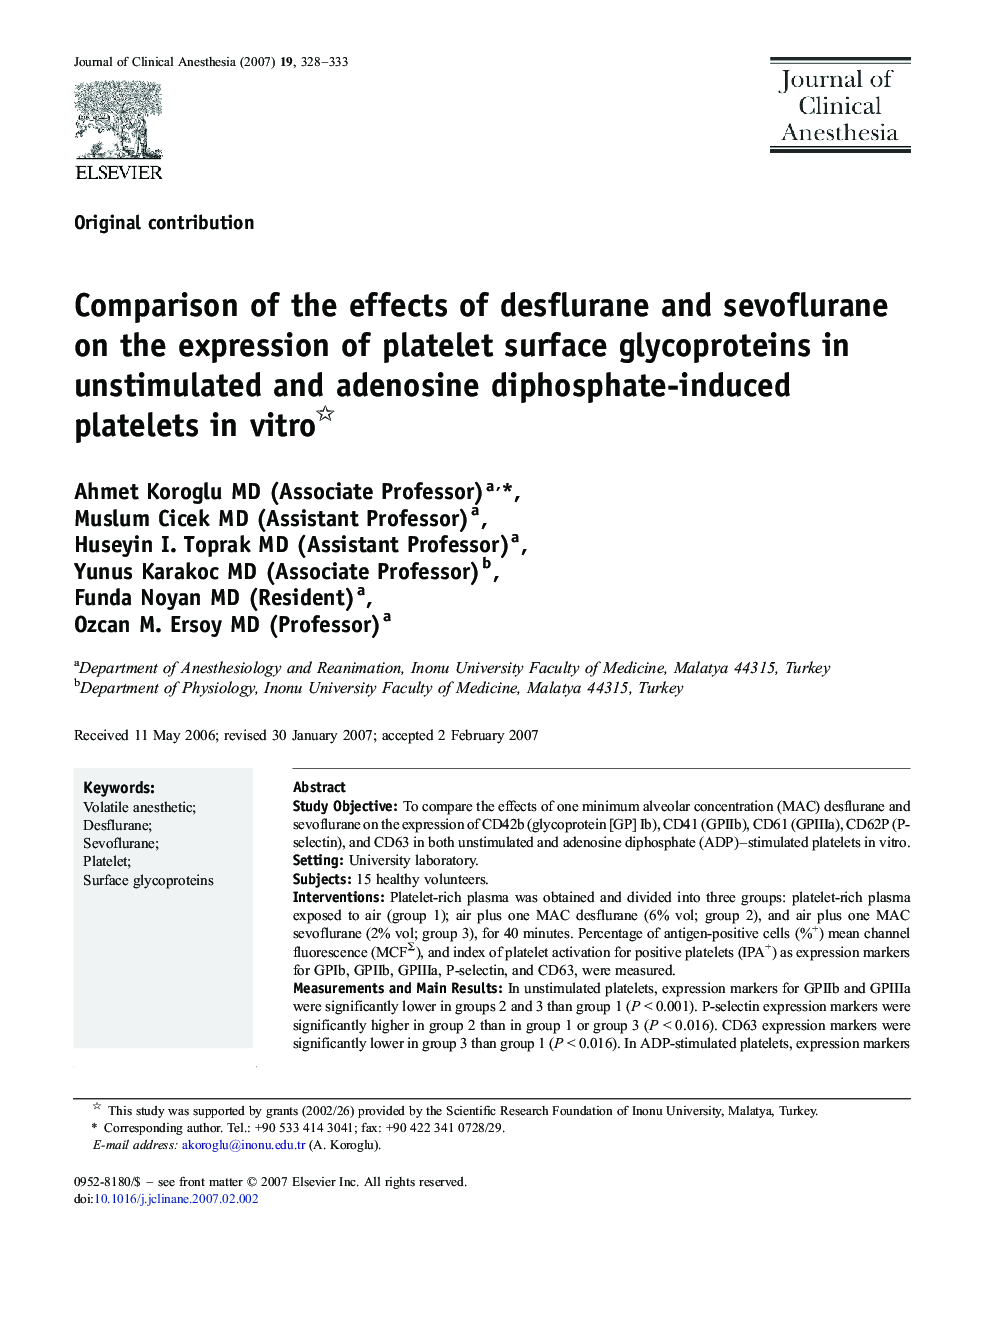 Comparison of the effects of desflurane and sevoflurane on the expression of platelet surface glycoproteins in unstimulated and adenosine diphosphate-induced platelets in vitro⋆